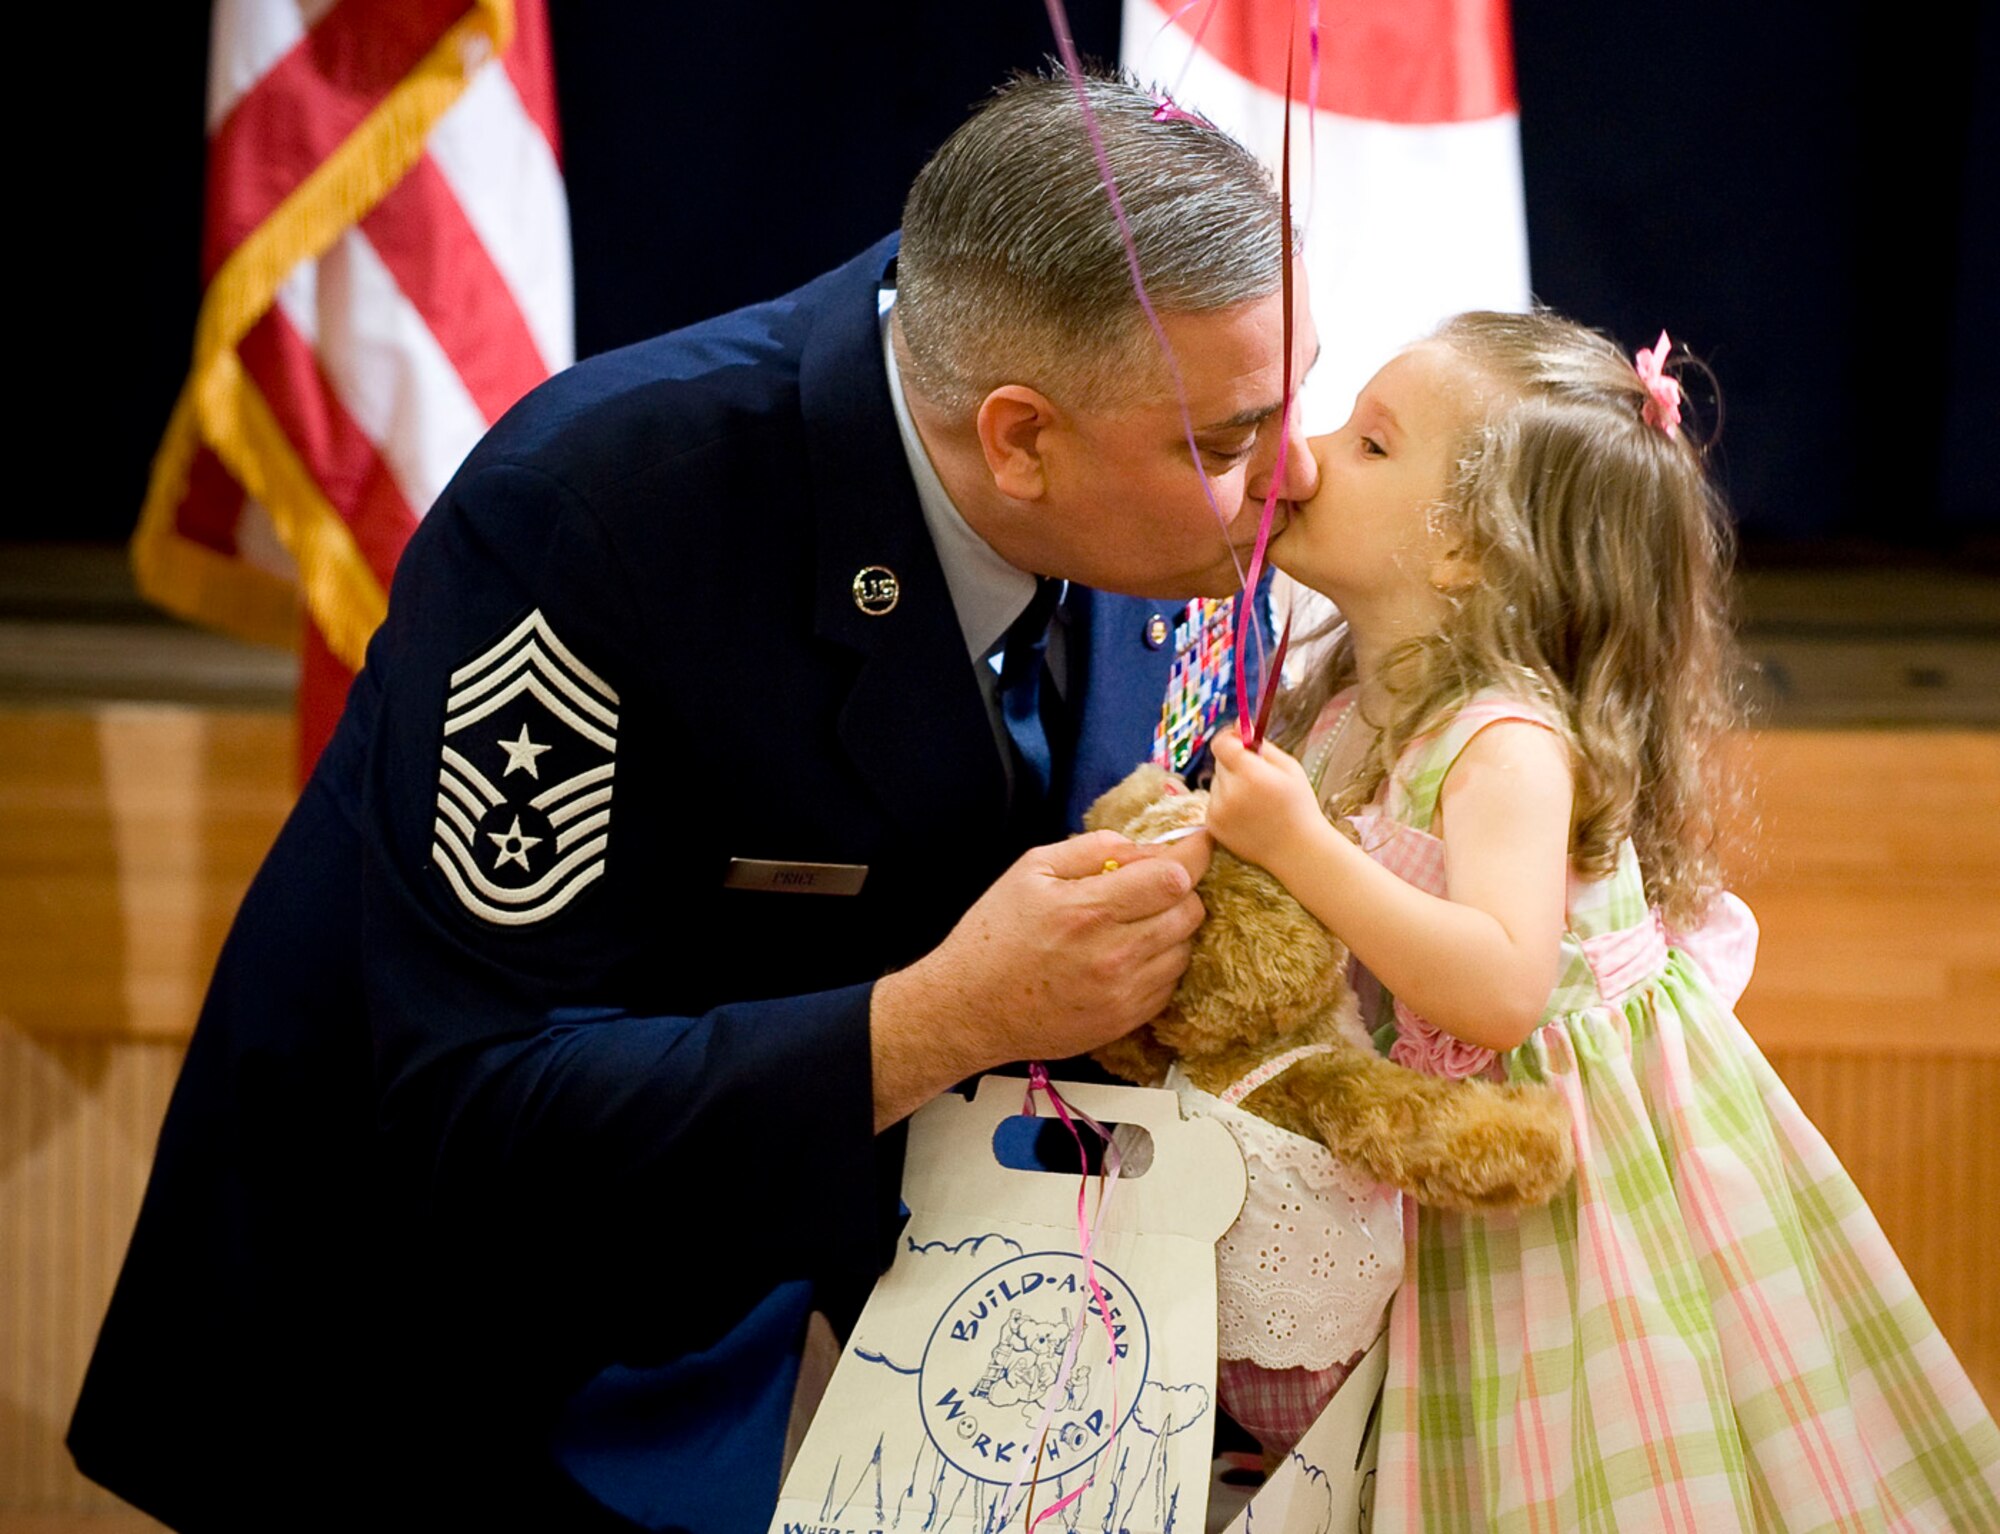 MISAWA AIR BASE, Japan -- Chief Master Sgt. Ricky Price kisses his daughter, Makayla, after giving her a bear during his retirement ceremony June 19, 2009. Chief Price made the bear and named it "Moody" which is a name synonymous with kisses and love in the Price household. (U.S. Air Force photo by Staff Sgt. Samuel Morse)